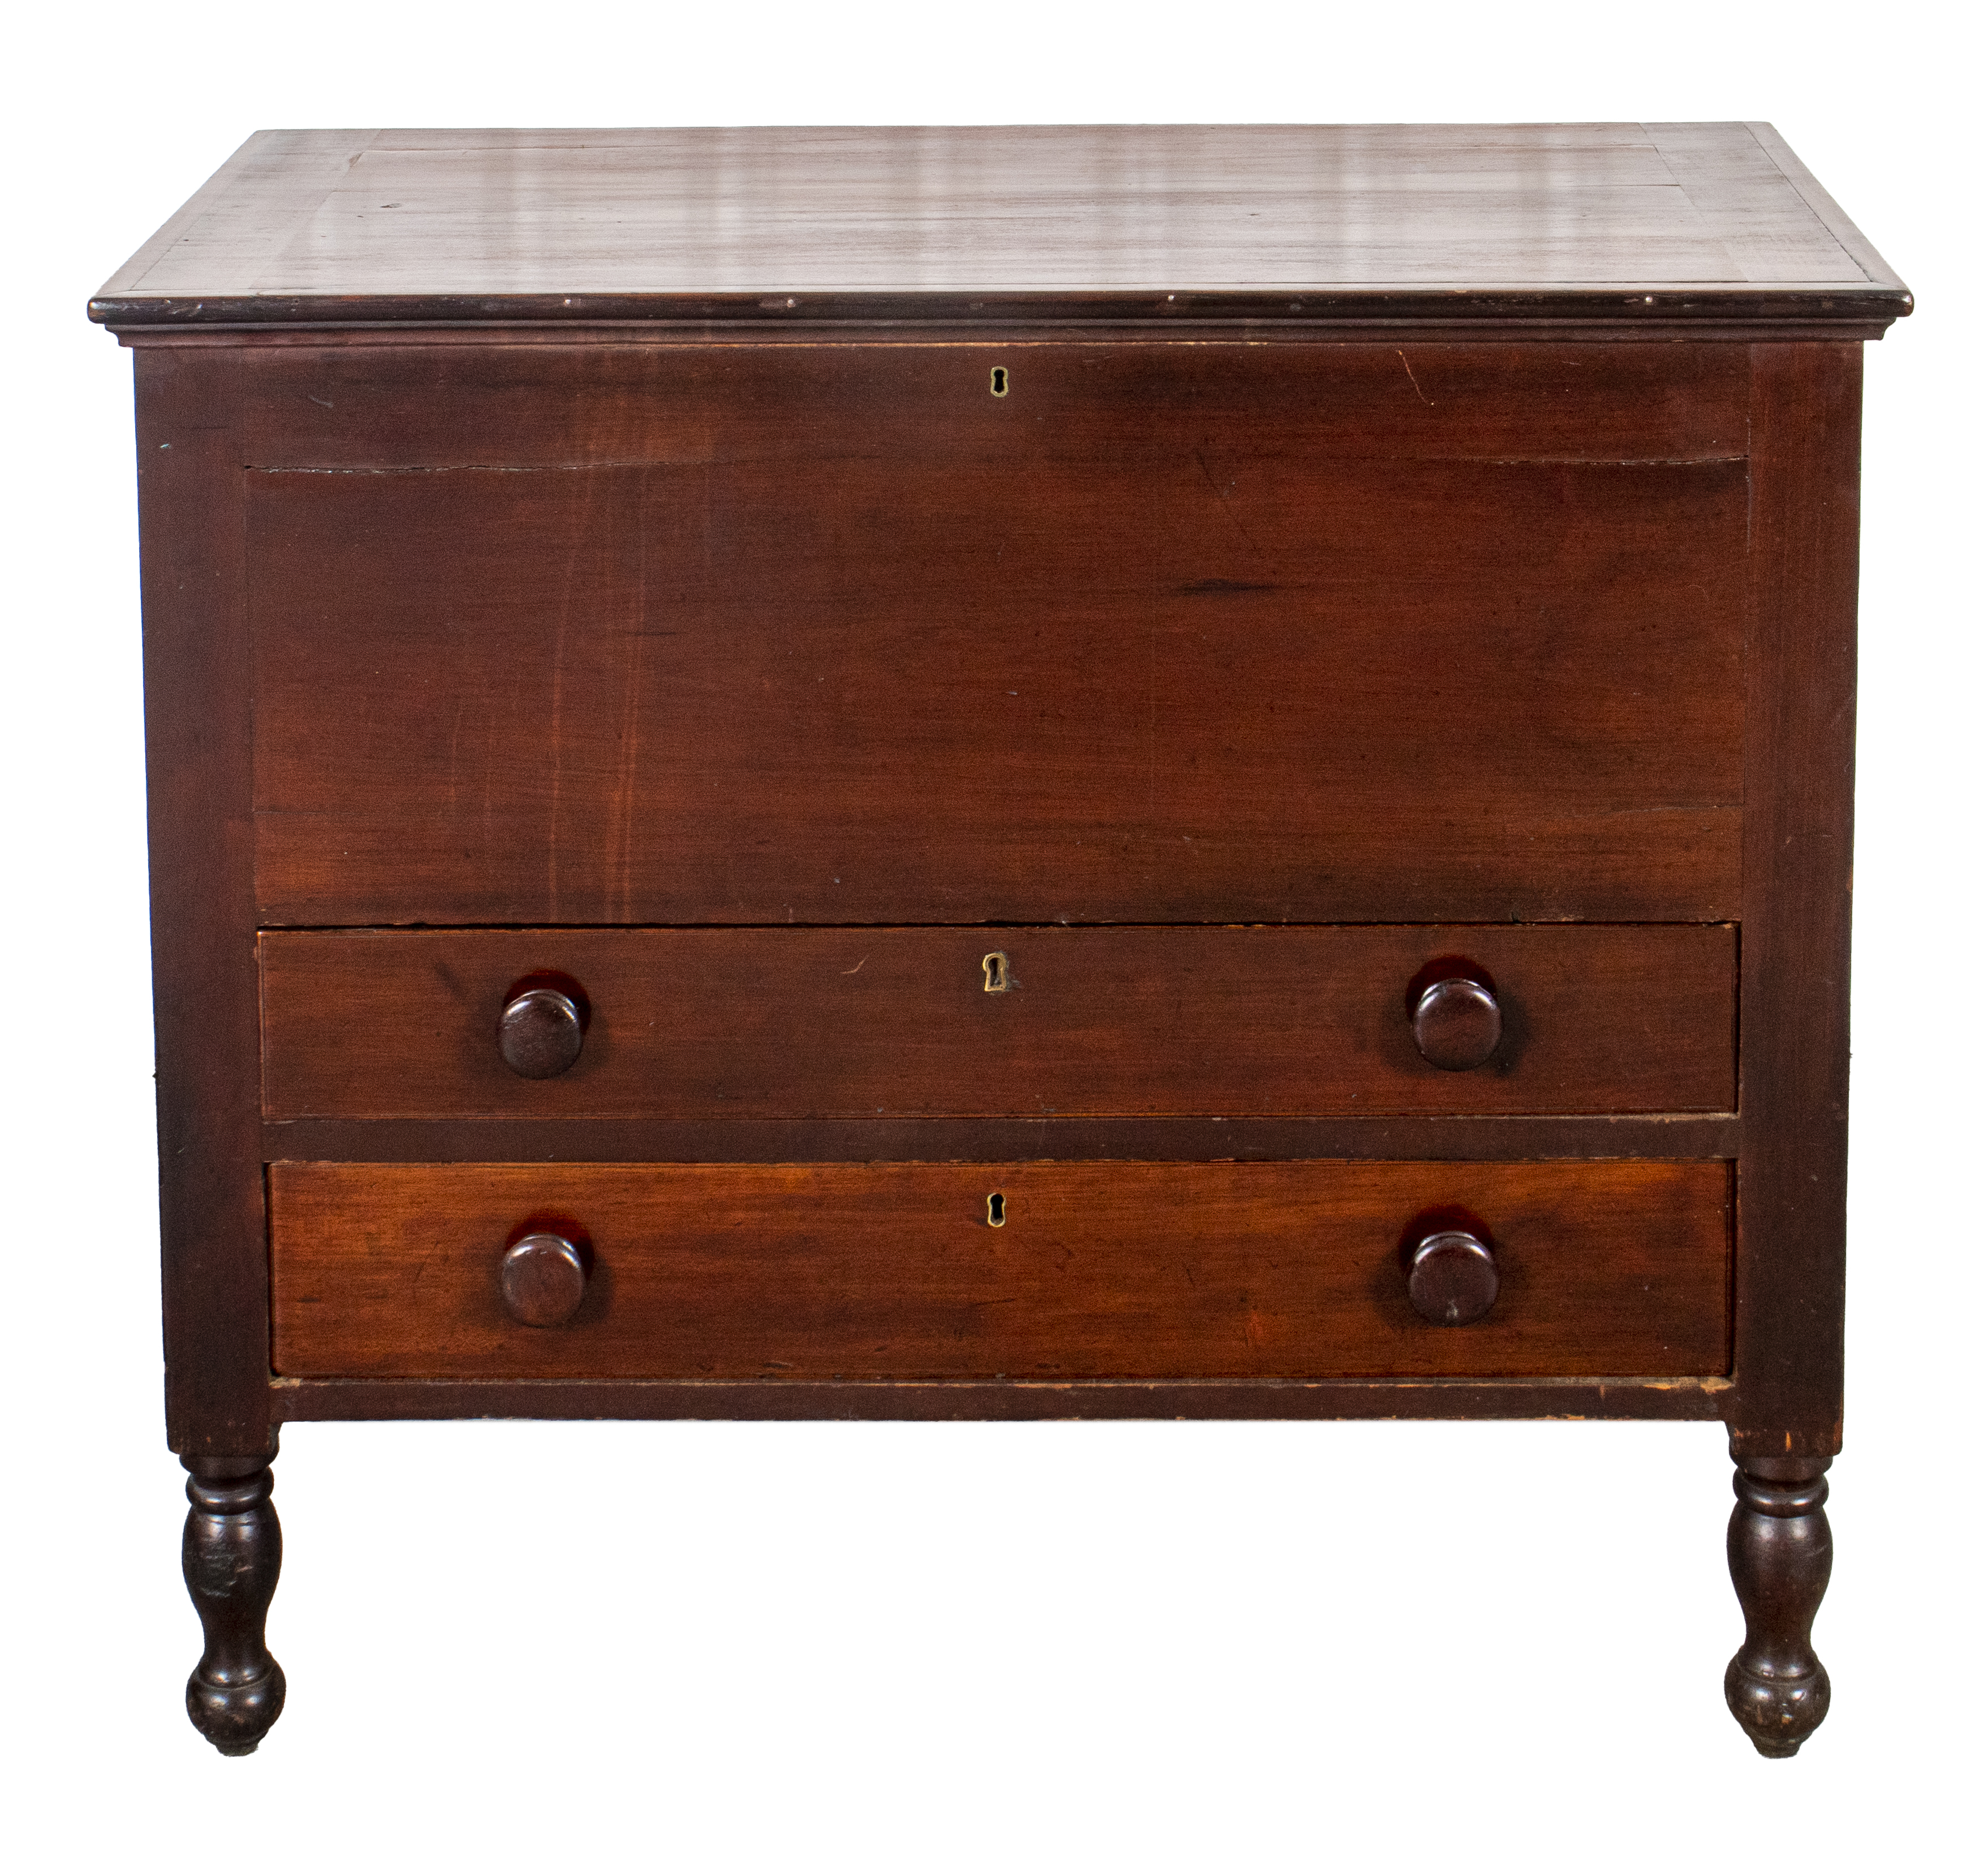 CLASSICAL WOOD CABINET WITH CASKET 363899